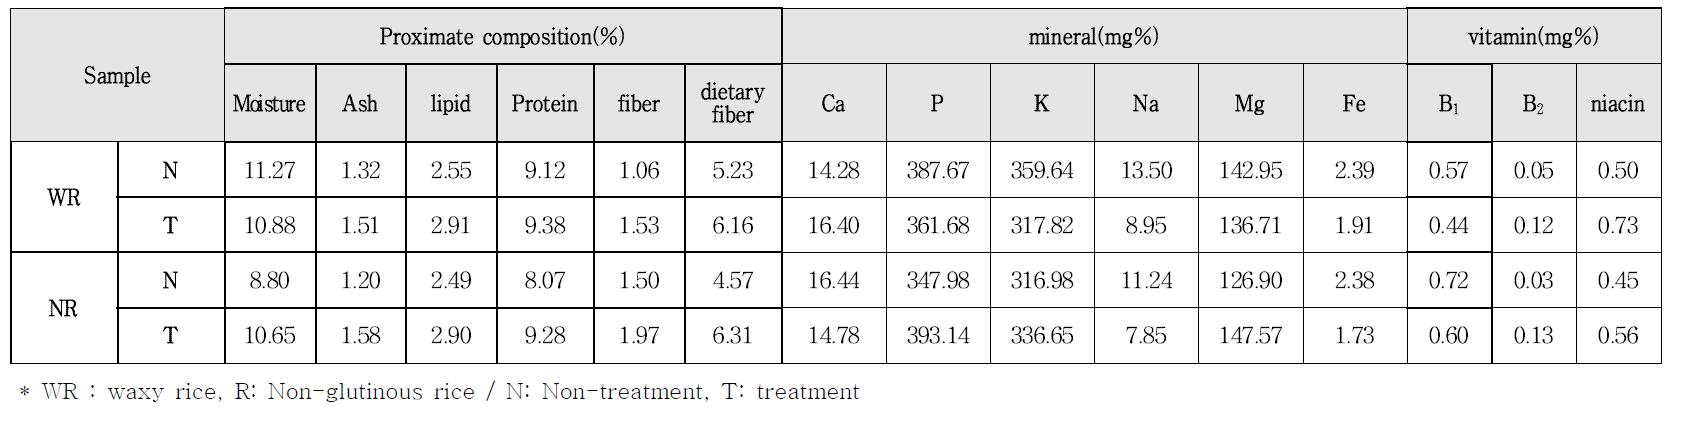 Effect of steeping on proximate composition, mineral and vitamin contents of rice for preparation of Olbyeossal from rough rice